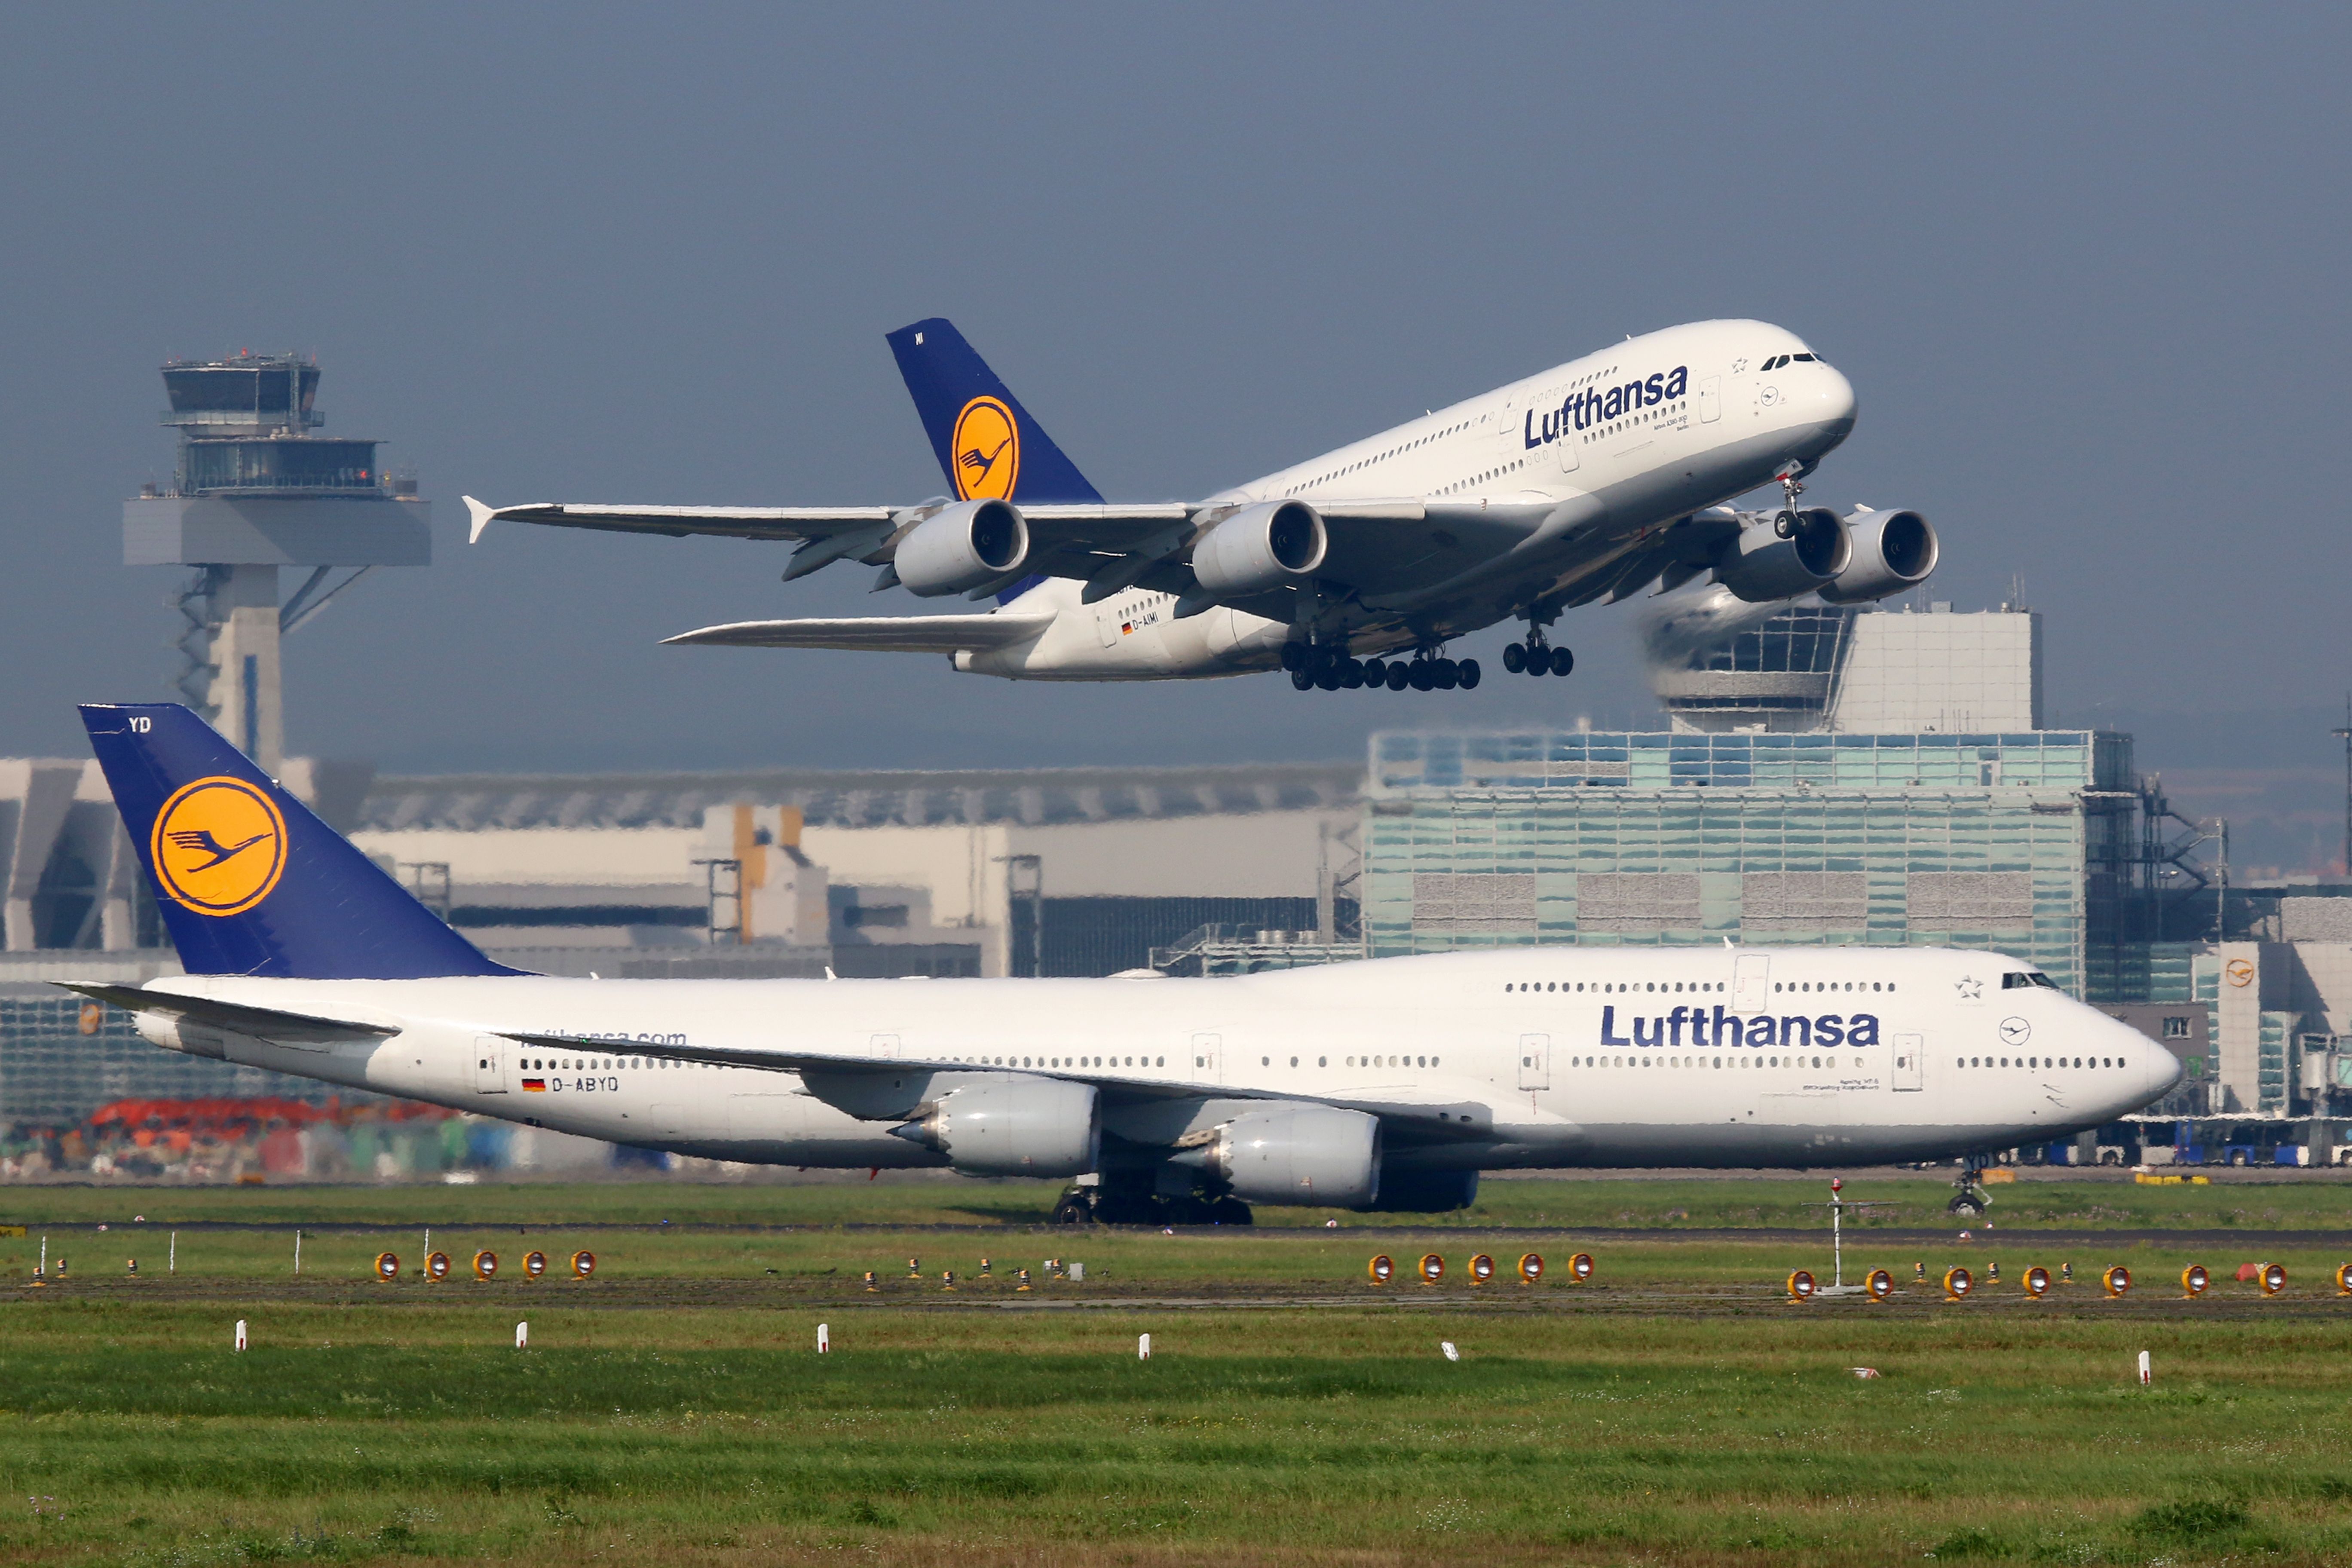 A Lufthansa Boeing 747 taxiing to the runway while a Lufthansa A380 takes off in the background.